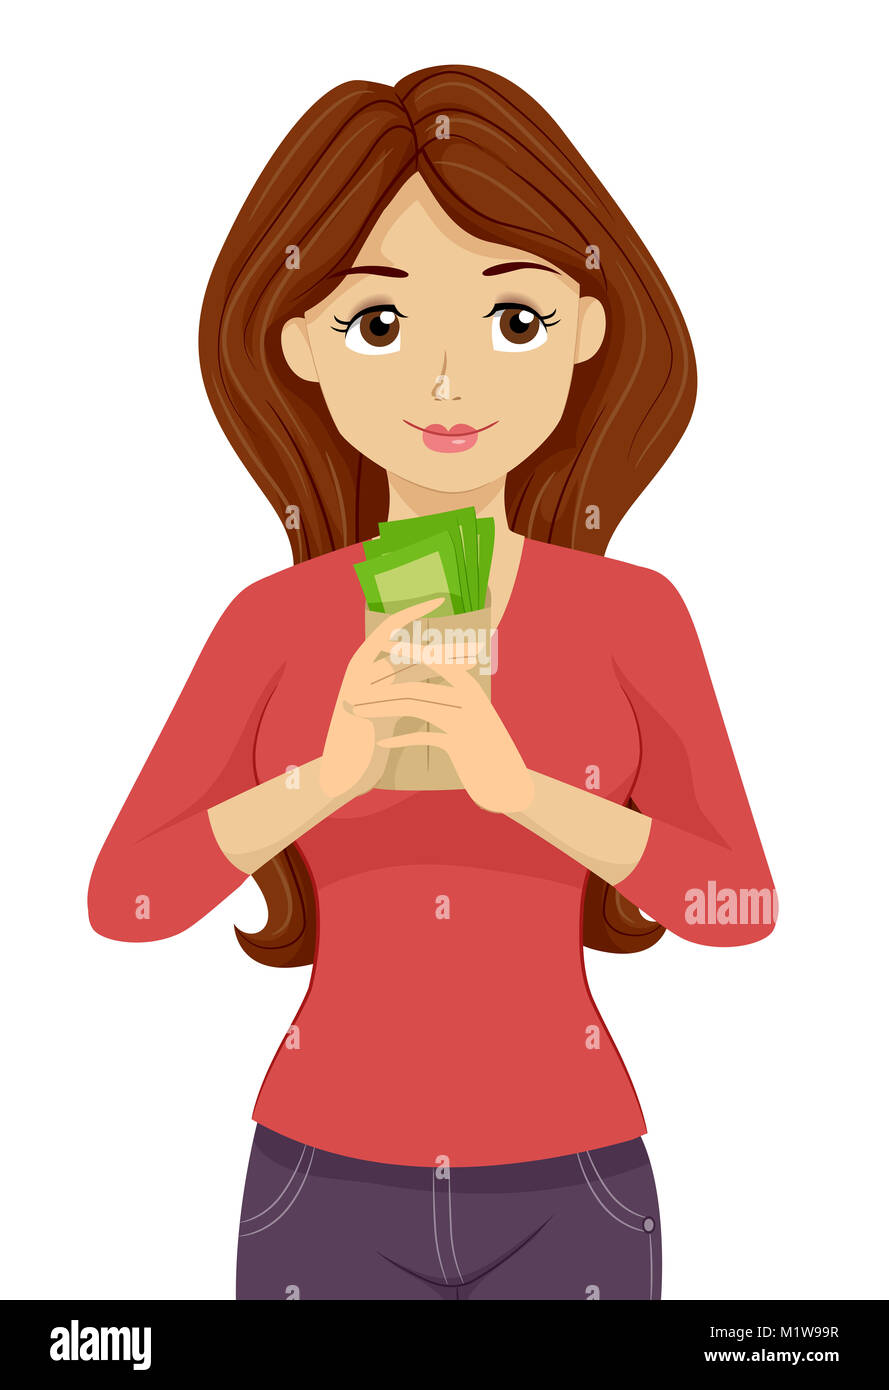 Illustration Featuring a Teenage Girl Lost in Thought While Holding a Wad of Cash Stock Photo